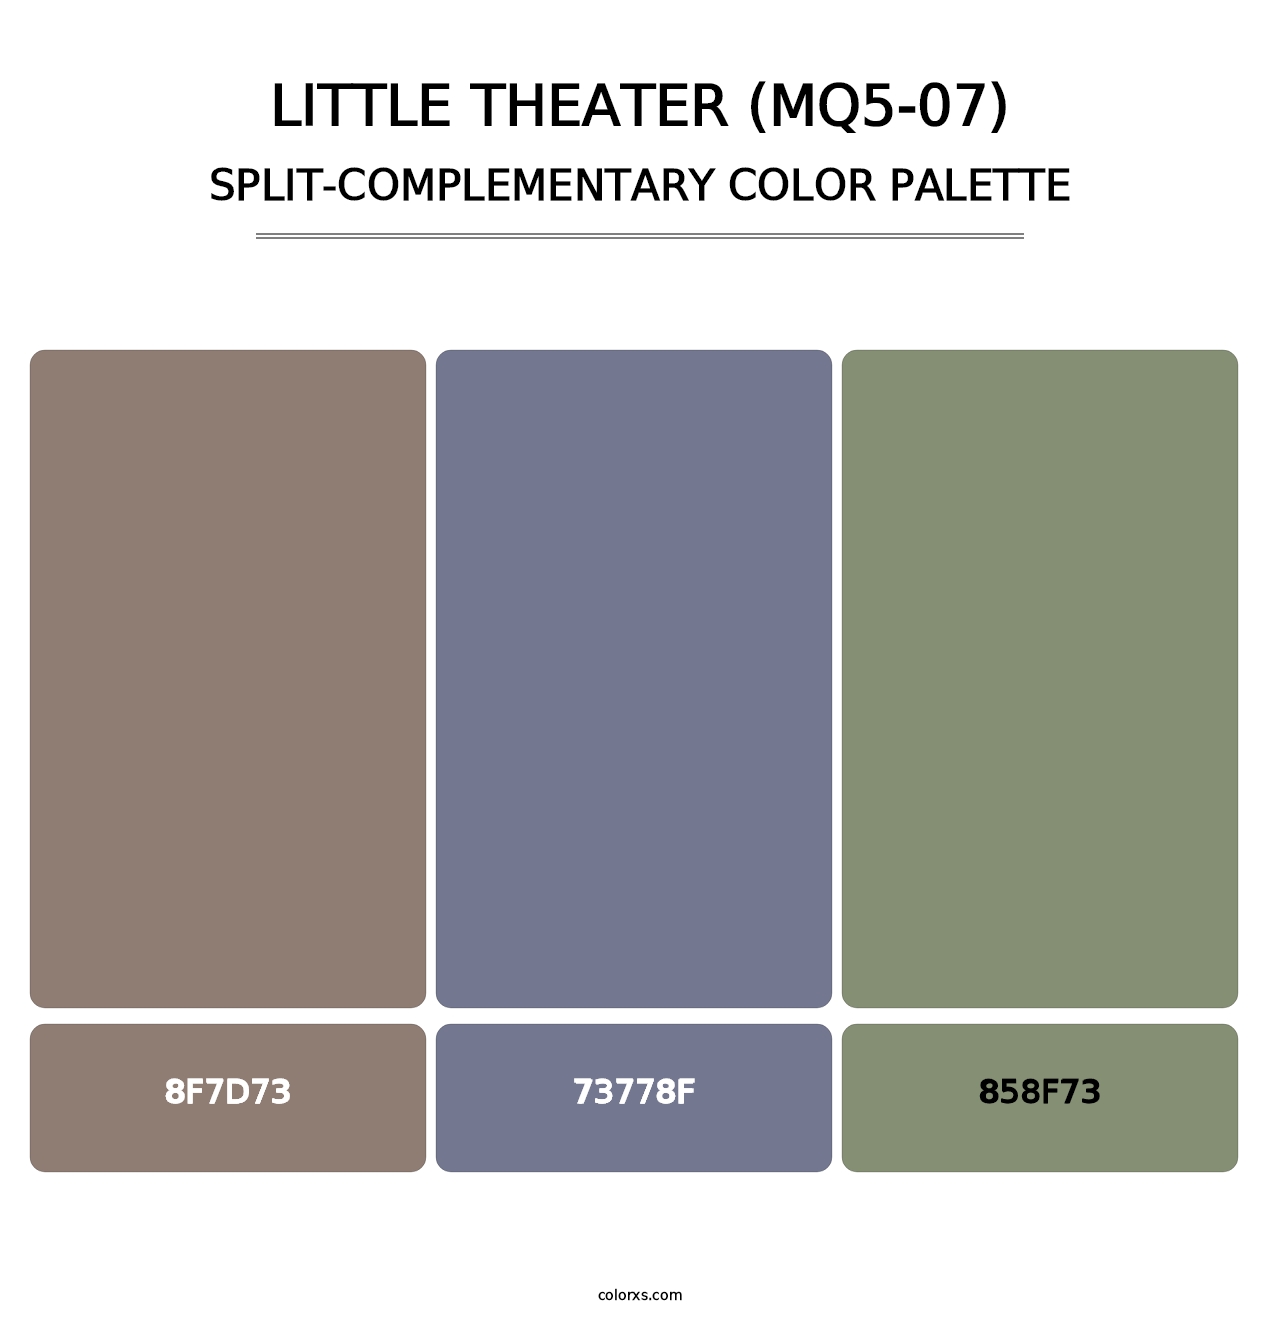 Little Theater (MQ5-07) - Split-Complementary Color Palette